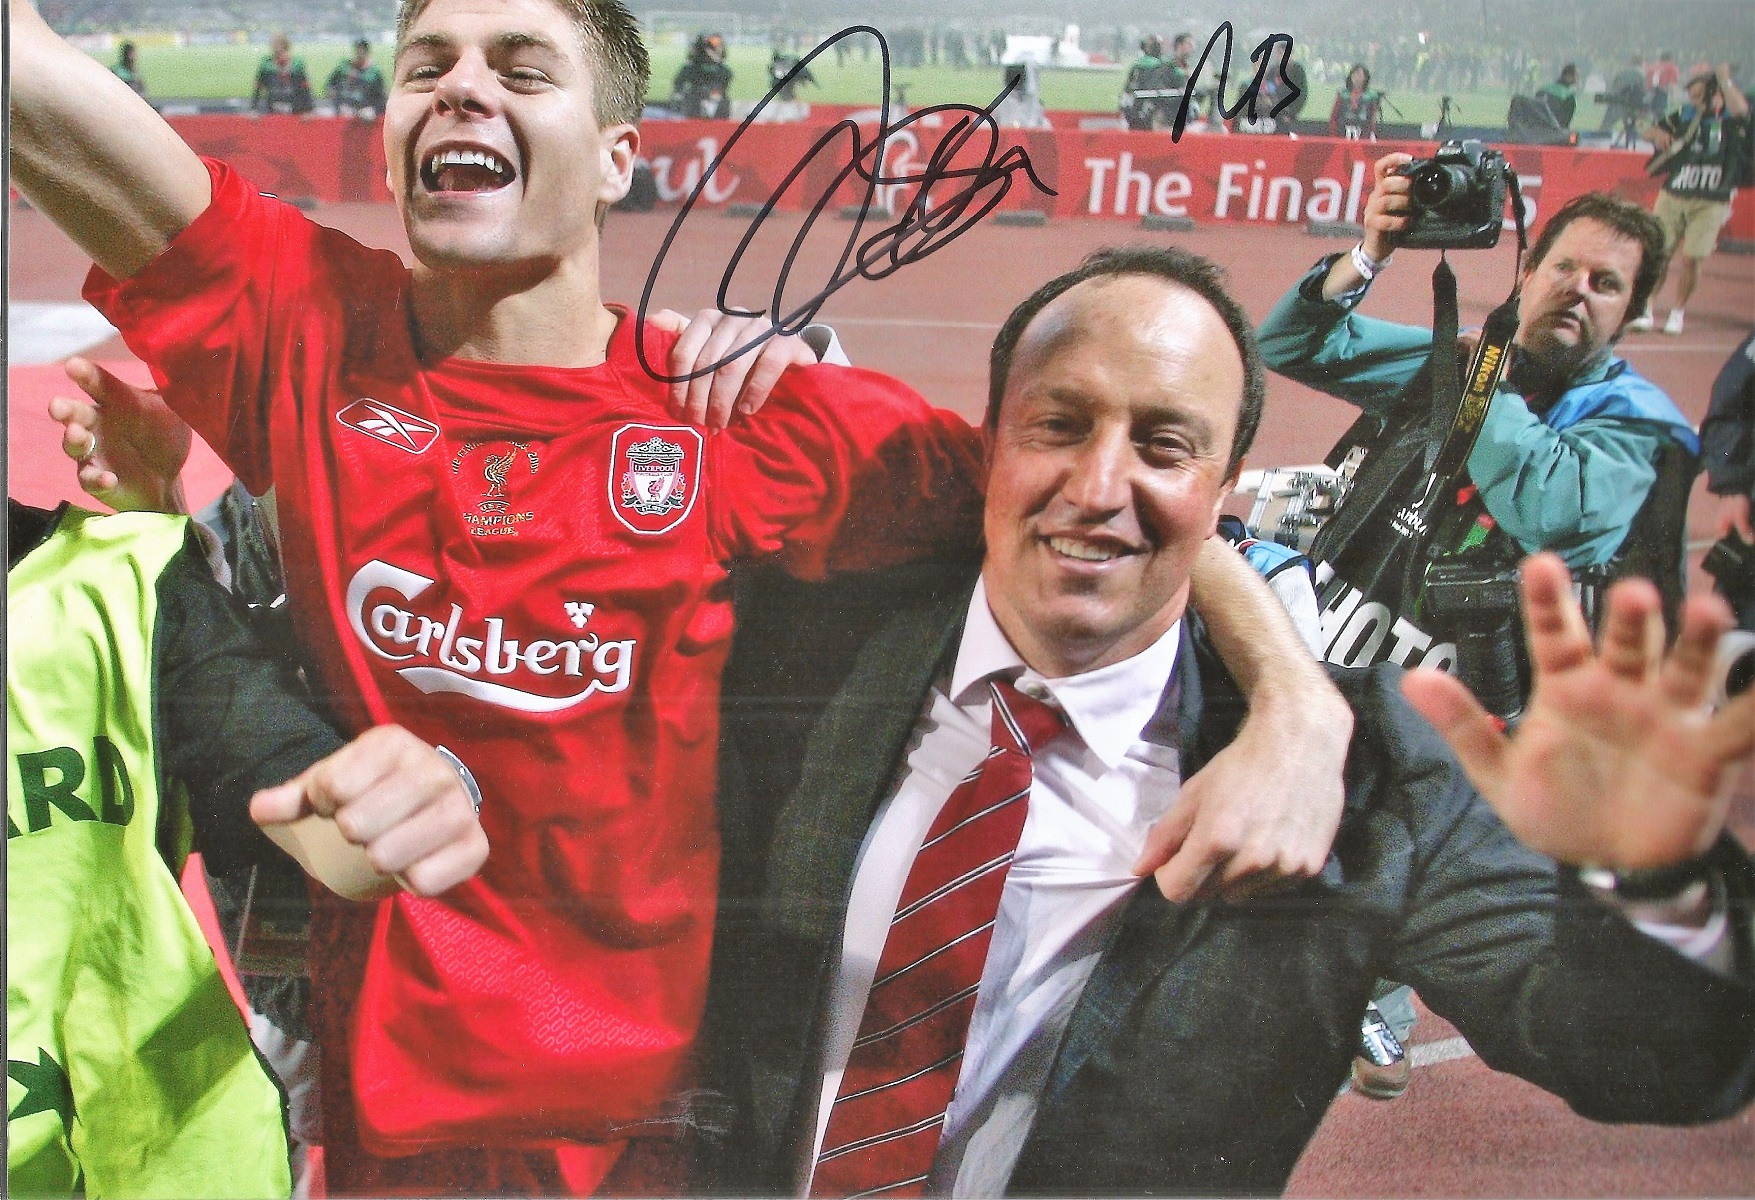 Rafael Benitez Hand signed 10x8 Colour Photo showing Benitez Celebrating Victoriously with Anfield